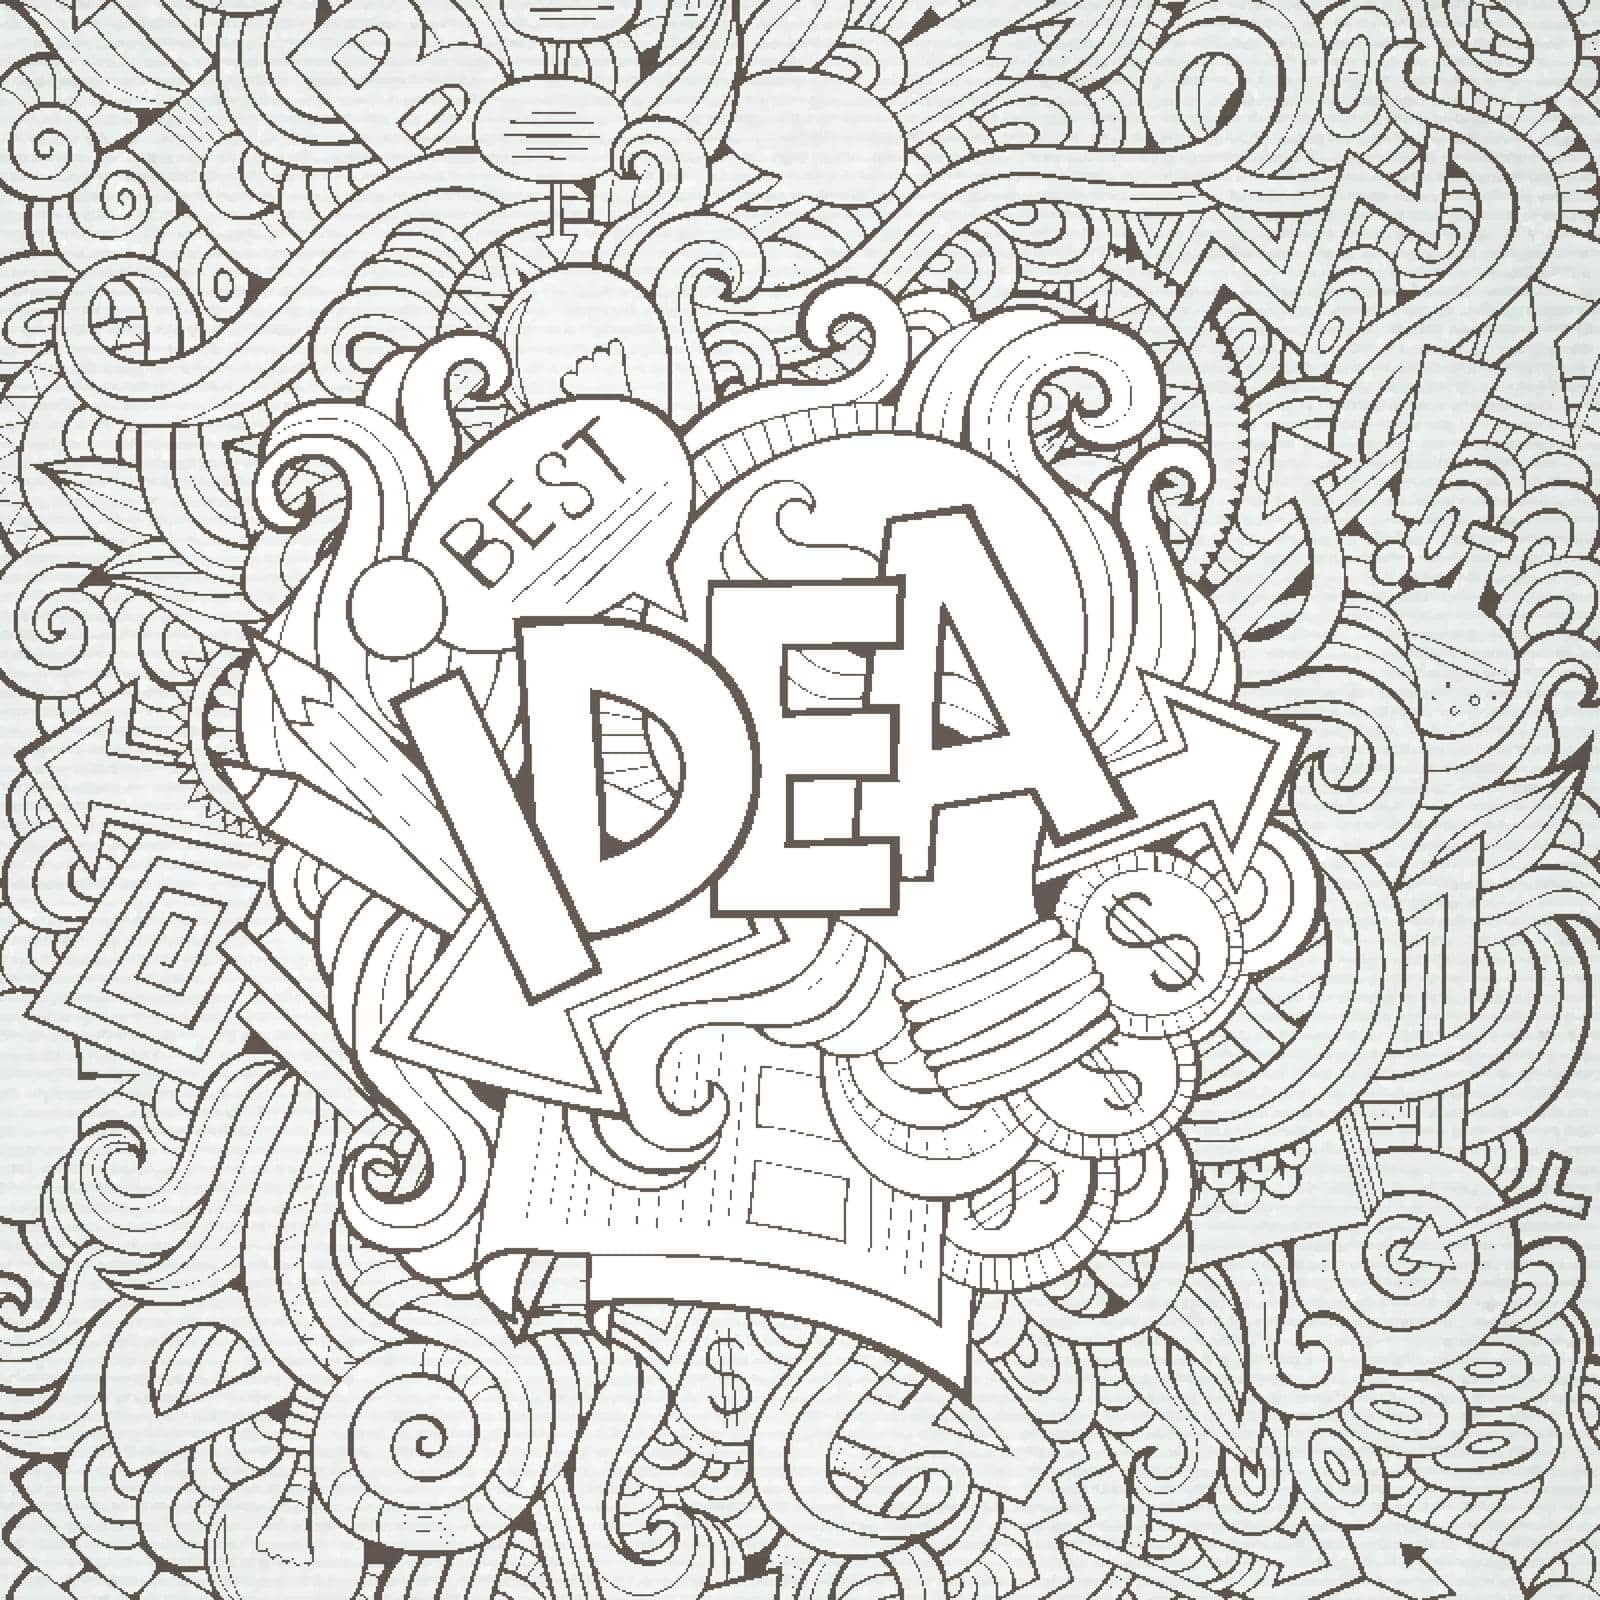 Idea hand lettering and doodles elements background. Vector illustration